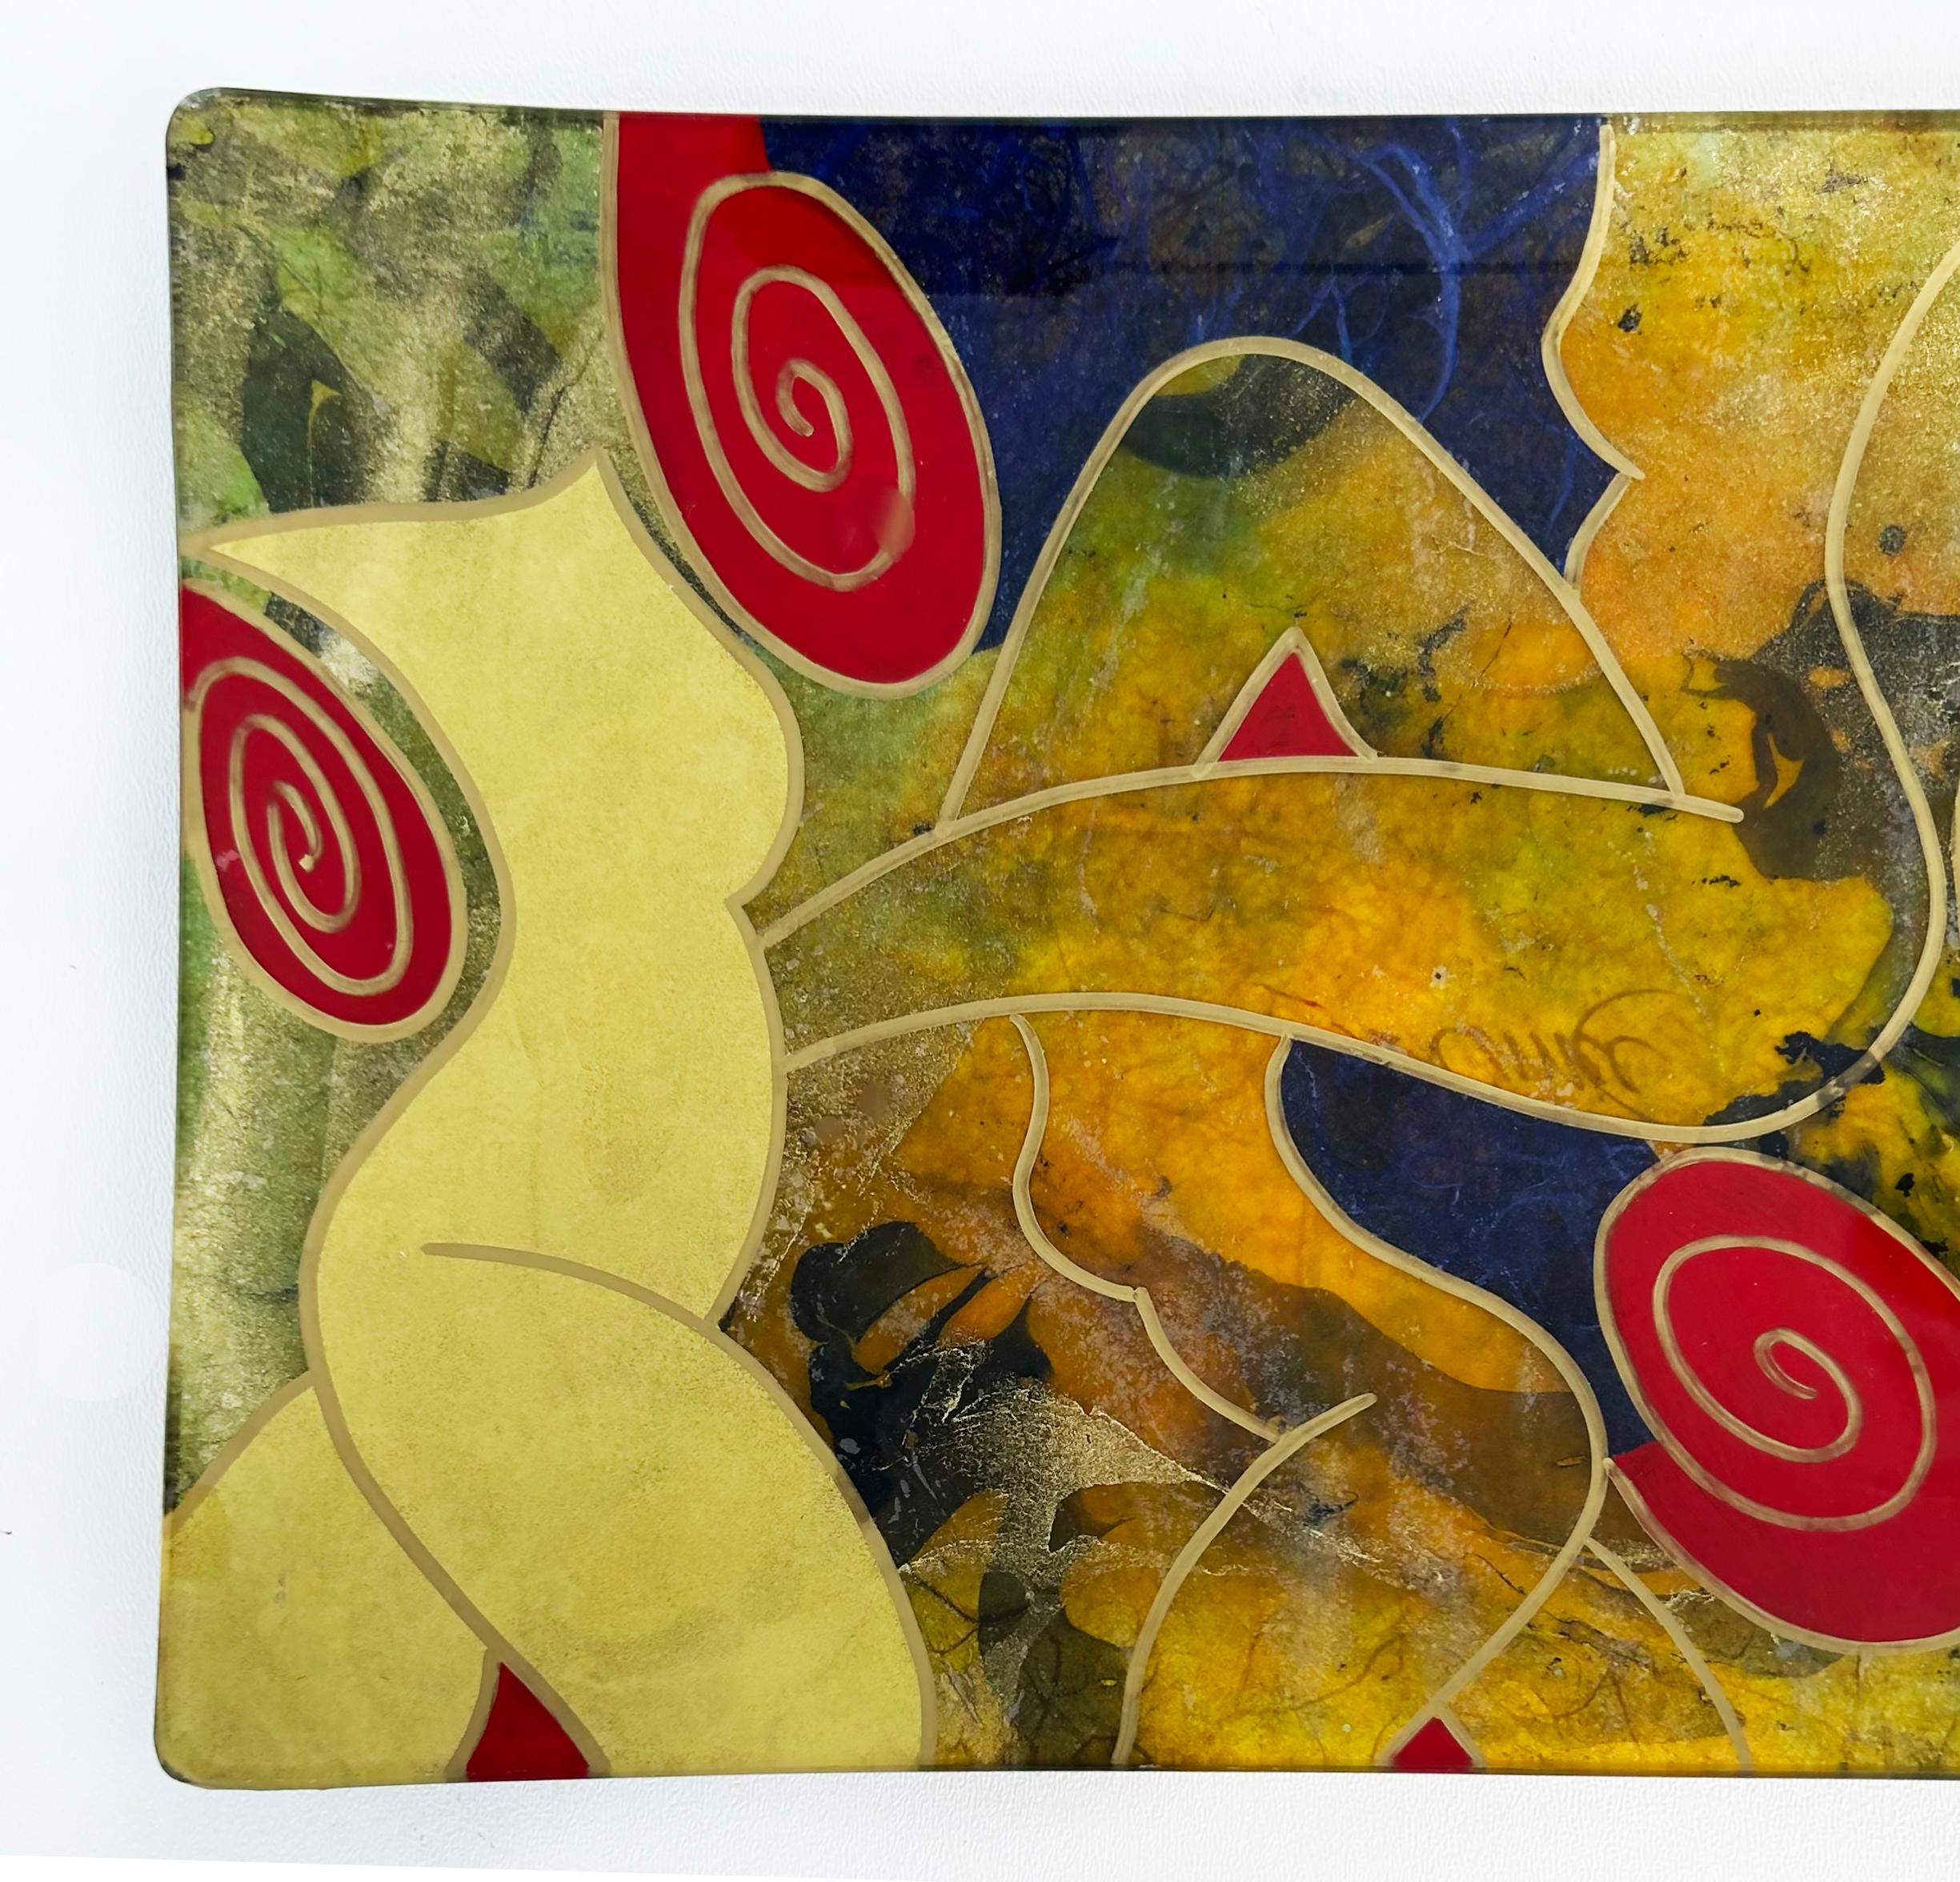 Abstract Verre Églomisé Reverse Painted Nudes Glass Tray, Signed

Offered for sale is a verre églomisé reverse painted figurative glass tray. The tray has nude figures painted and is illegibly signed on the verso. The composition is beautifully